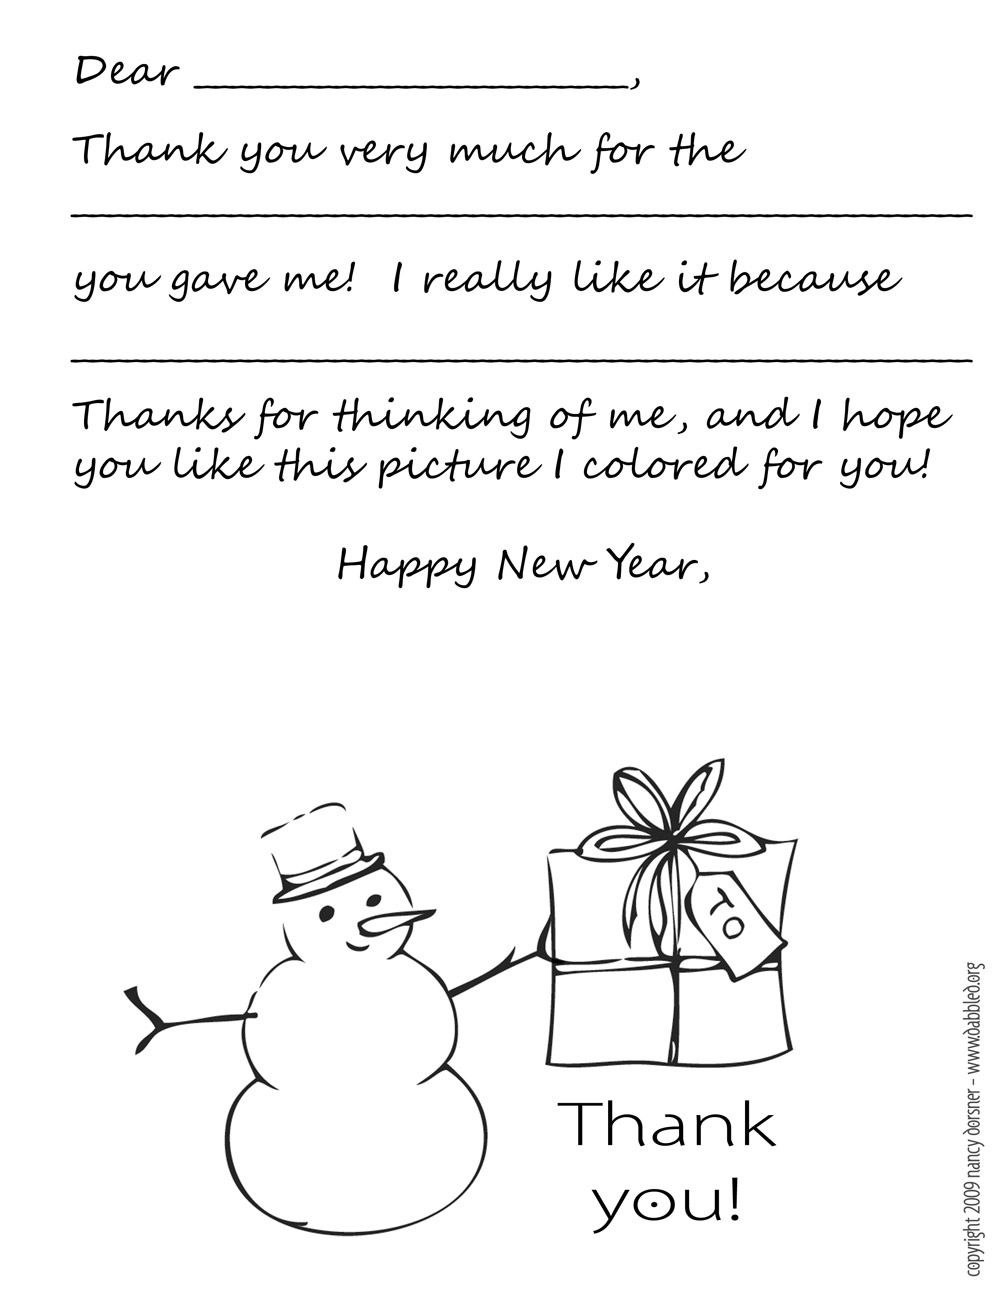 6-best-images-of-free-printable-christmas-thank-you-card-templates